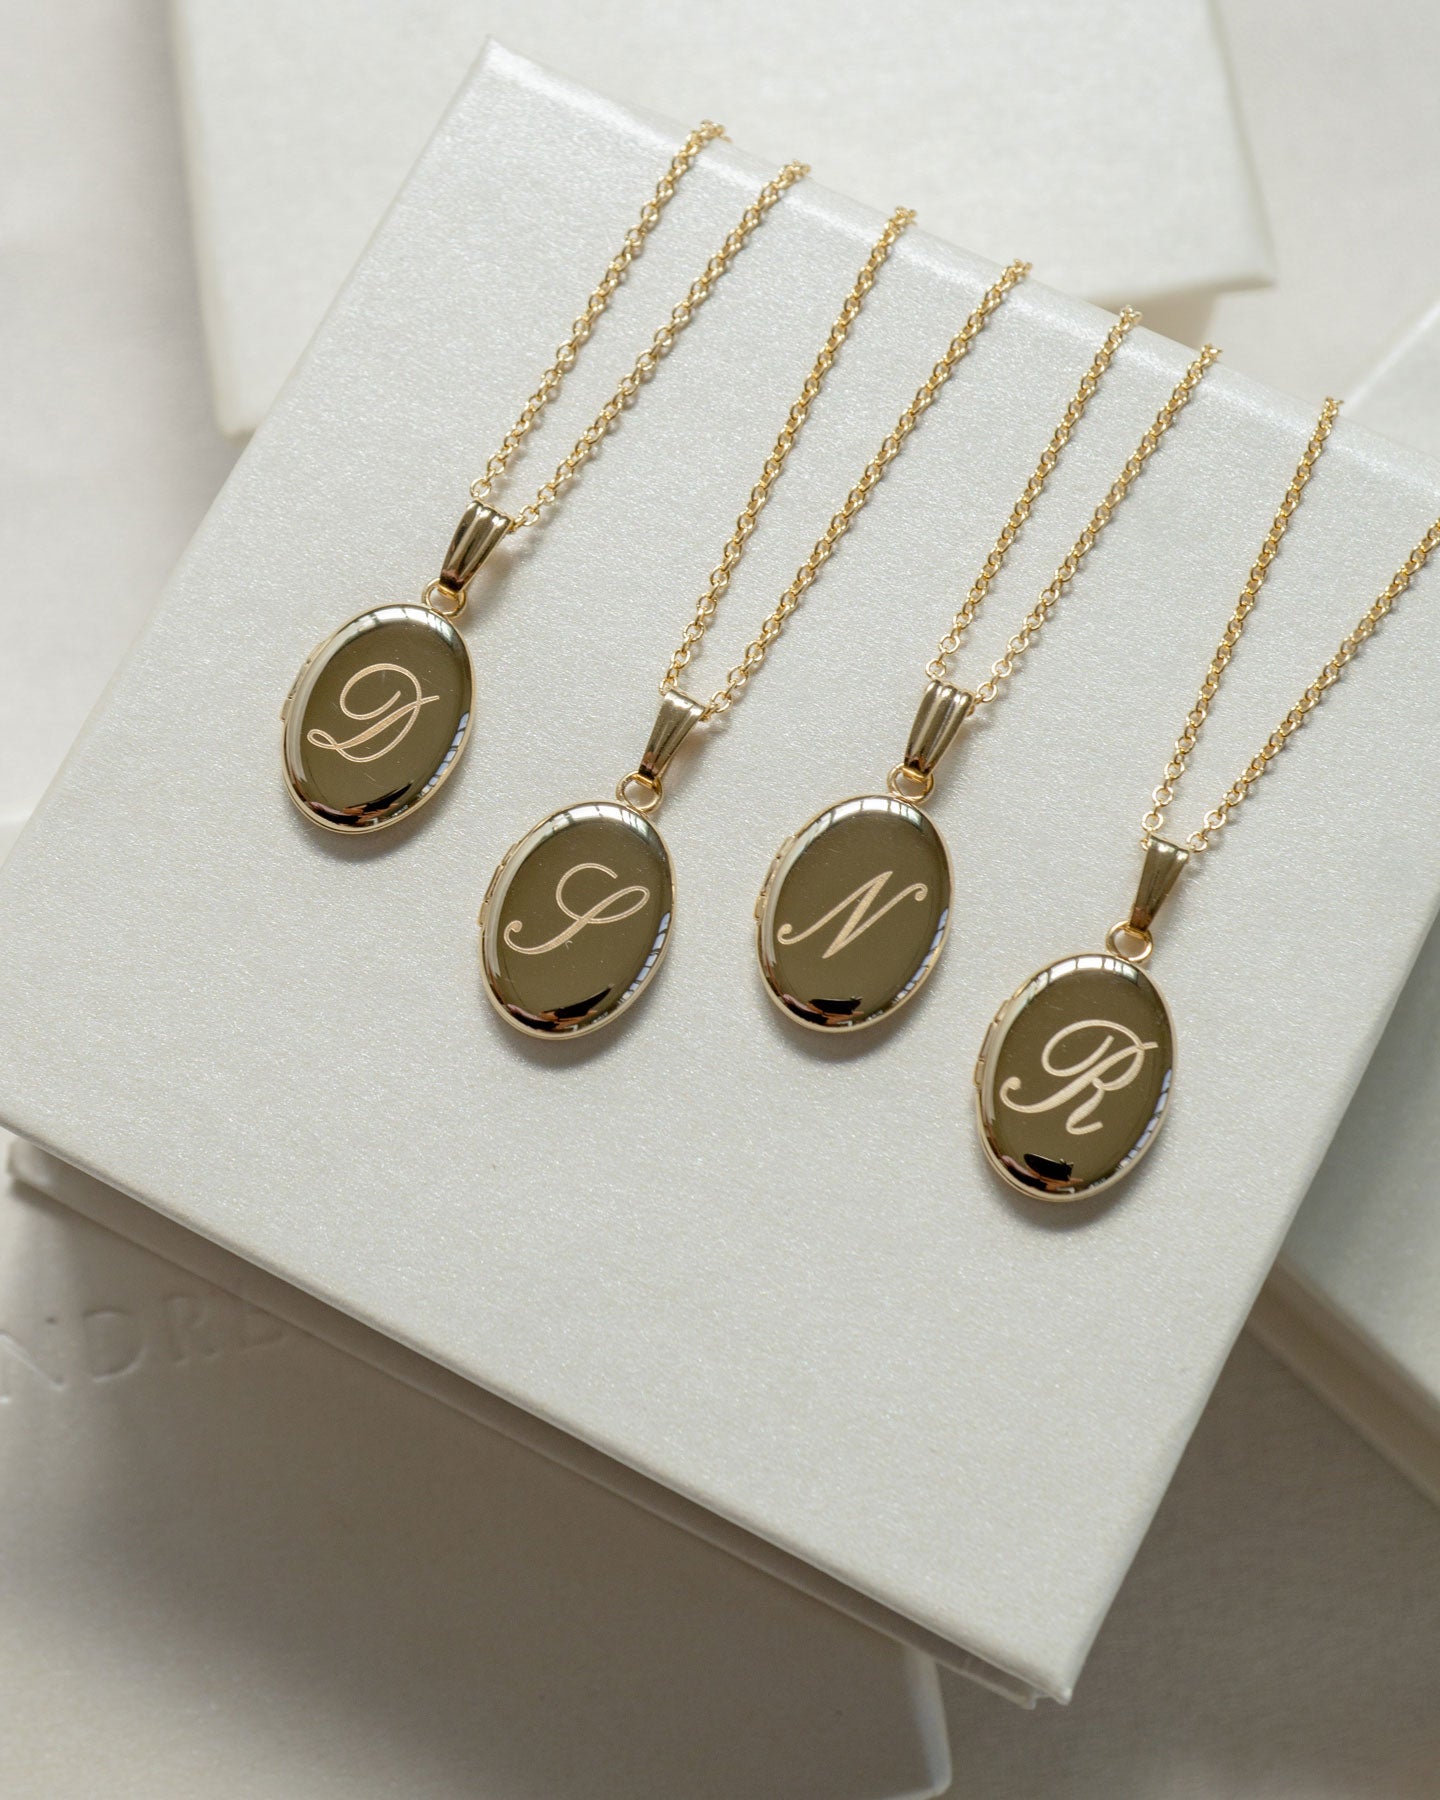 Monogram Personalized Oval Locket, Gold Filled, Silver, Minimalist Gifts, Engraved Necklace